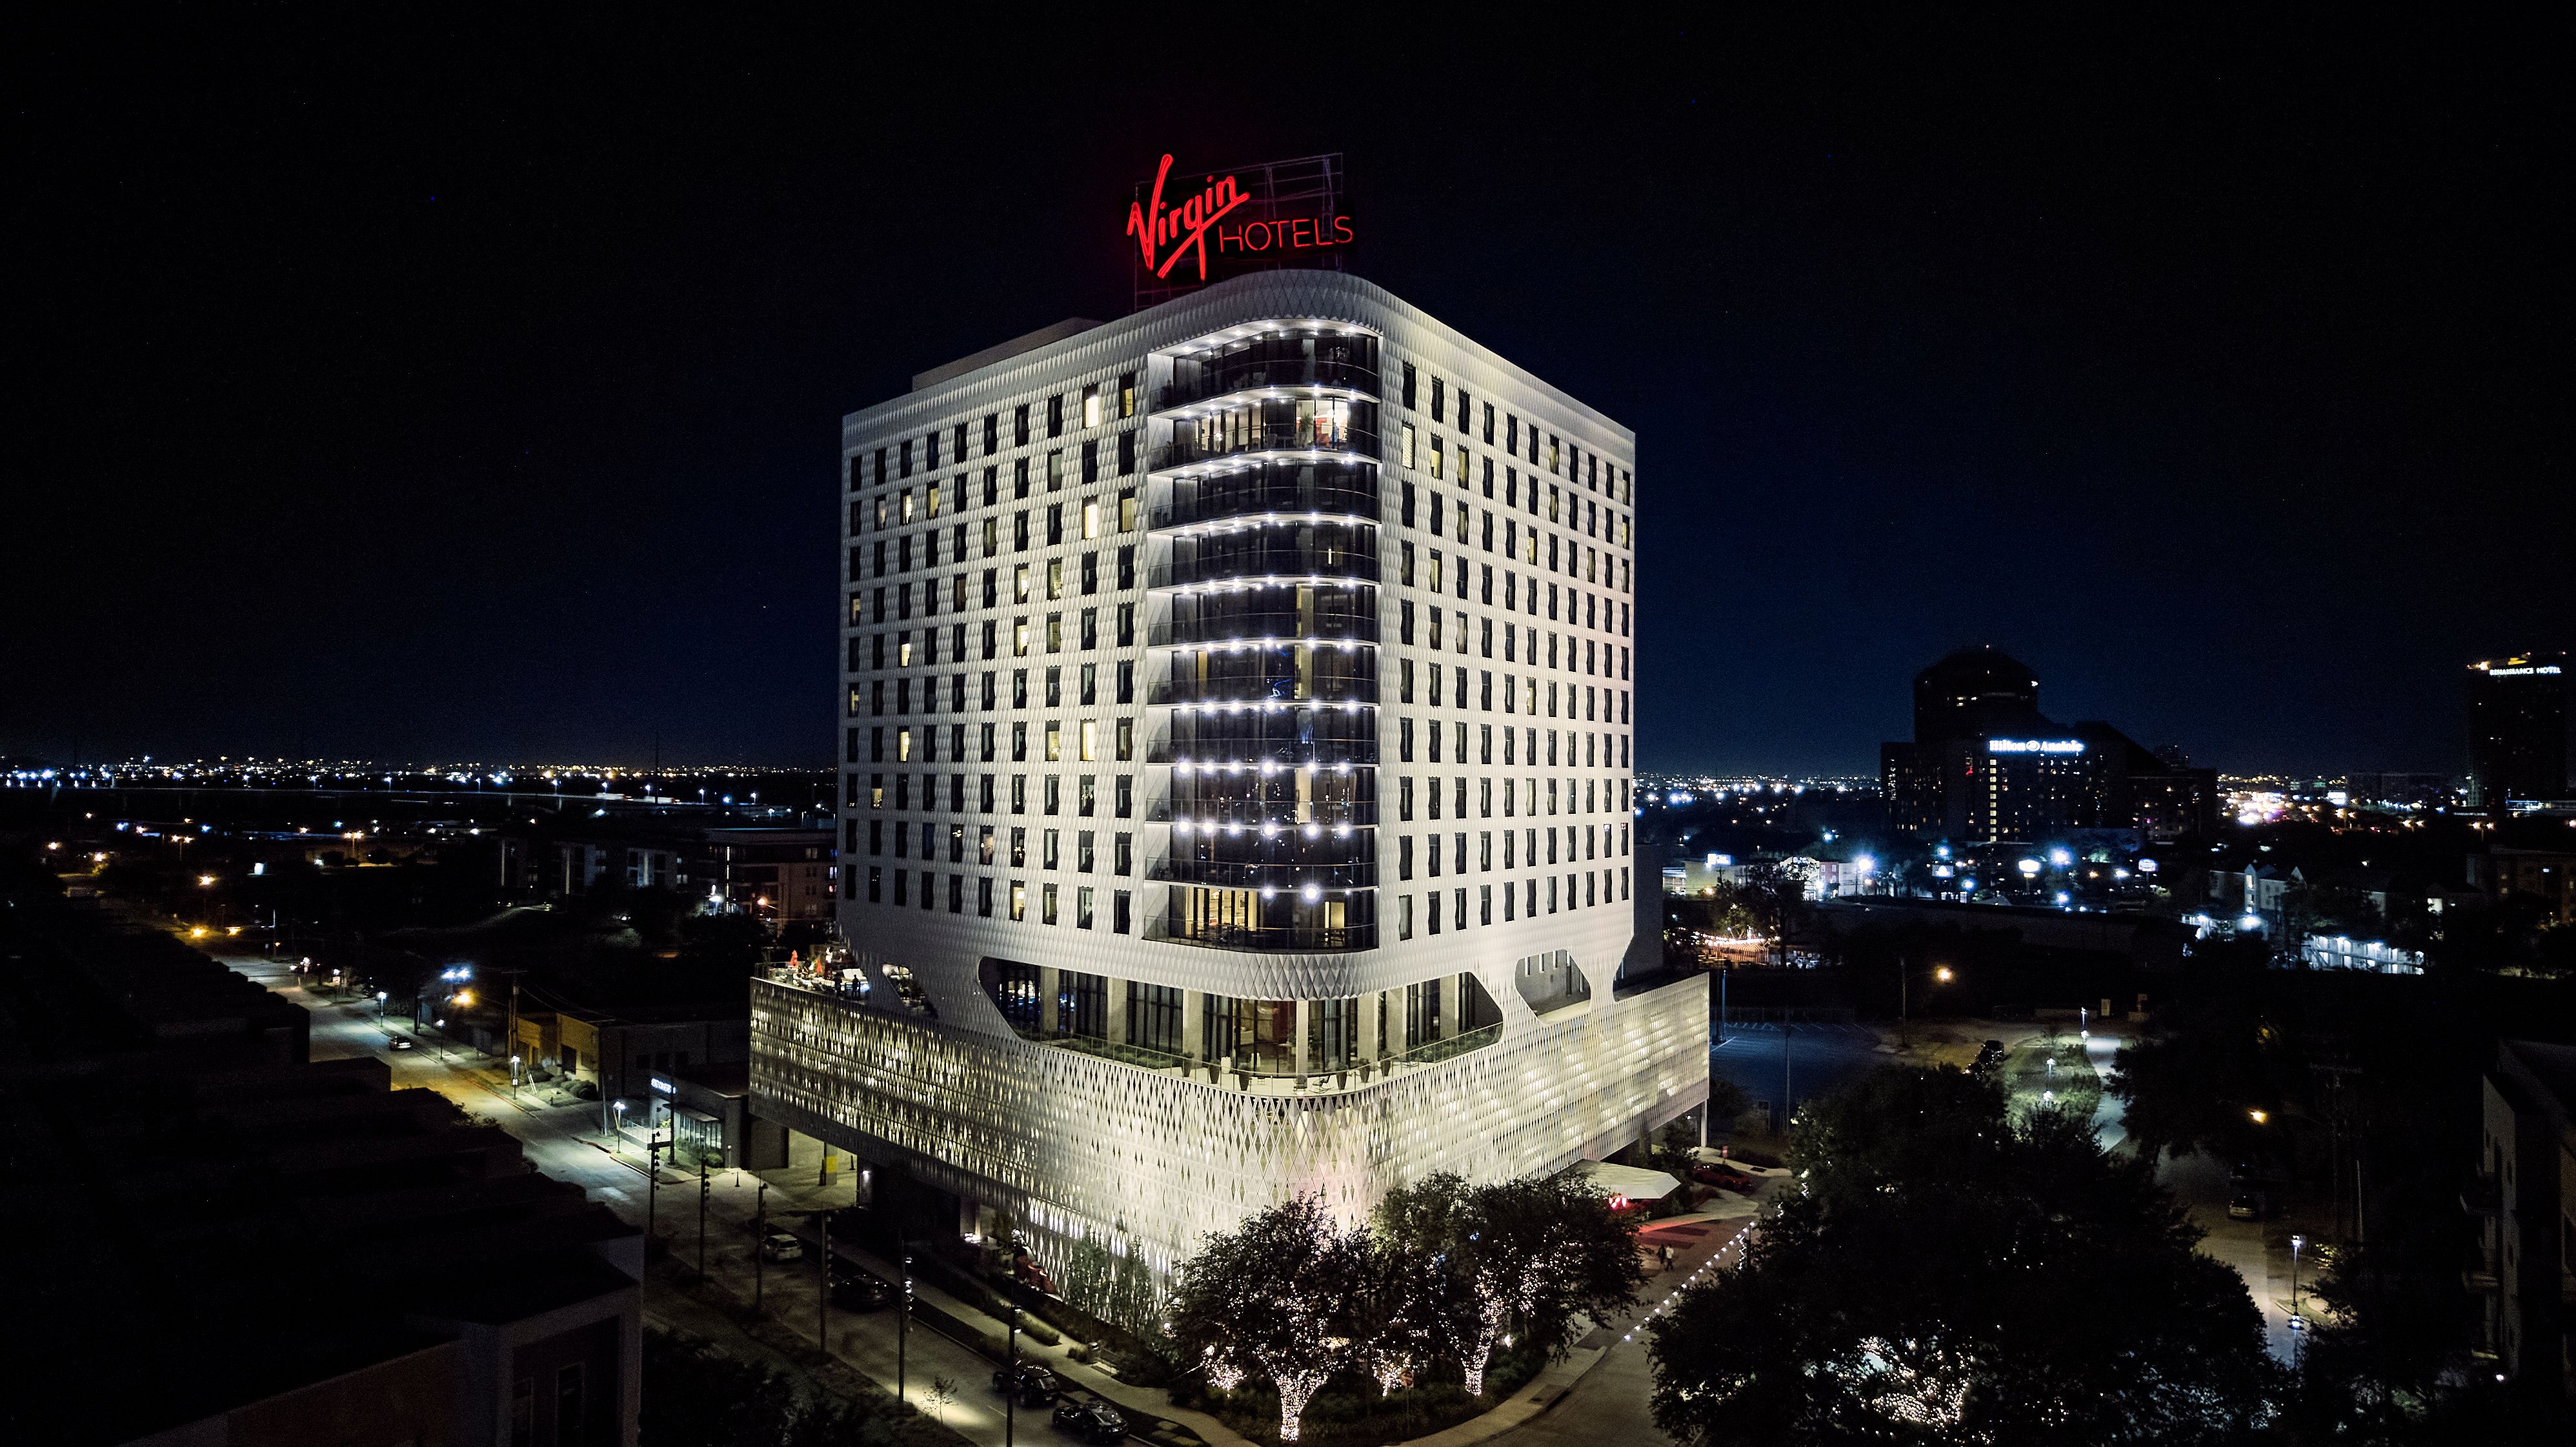 A wide shot of the outside of the Virgin Hotels Dallas